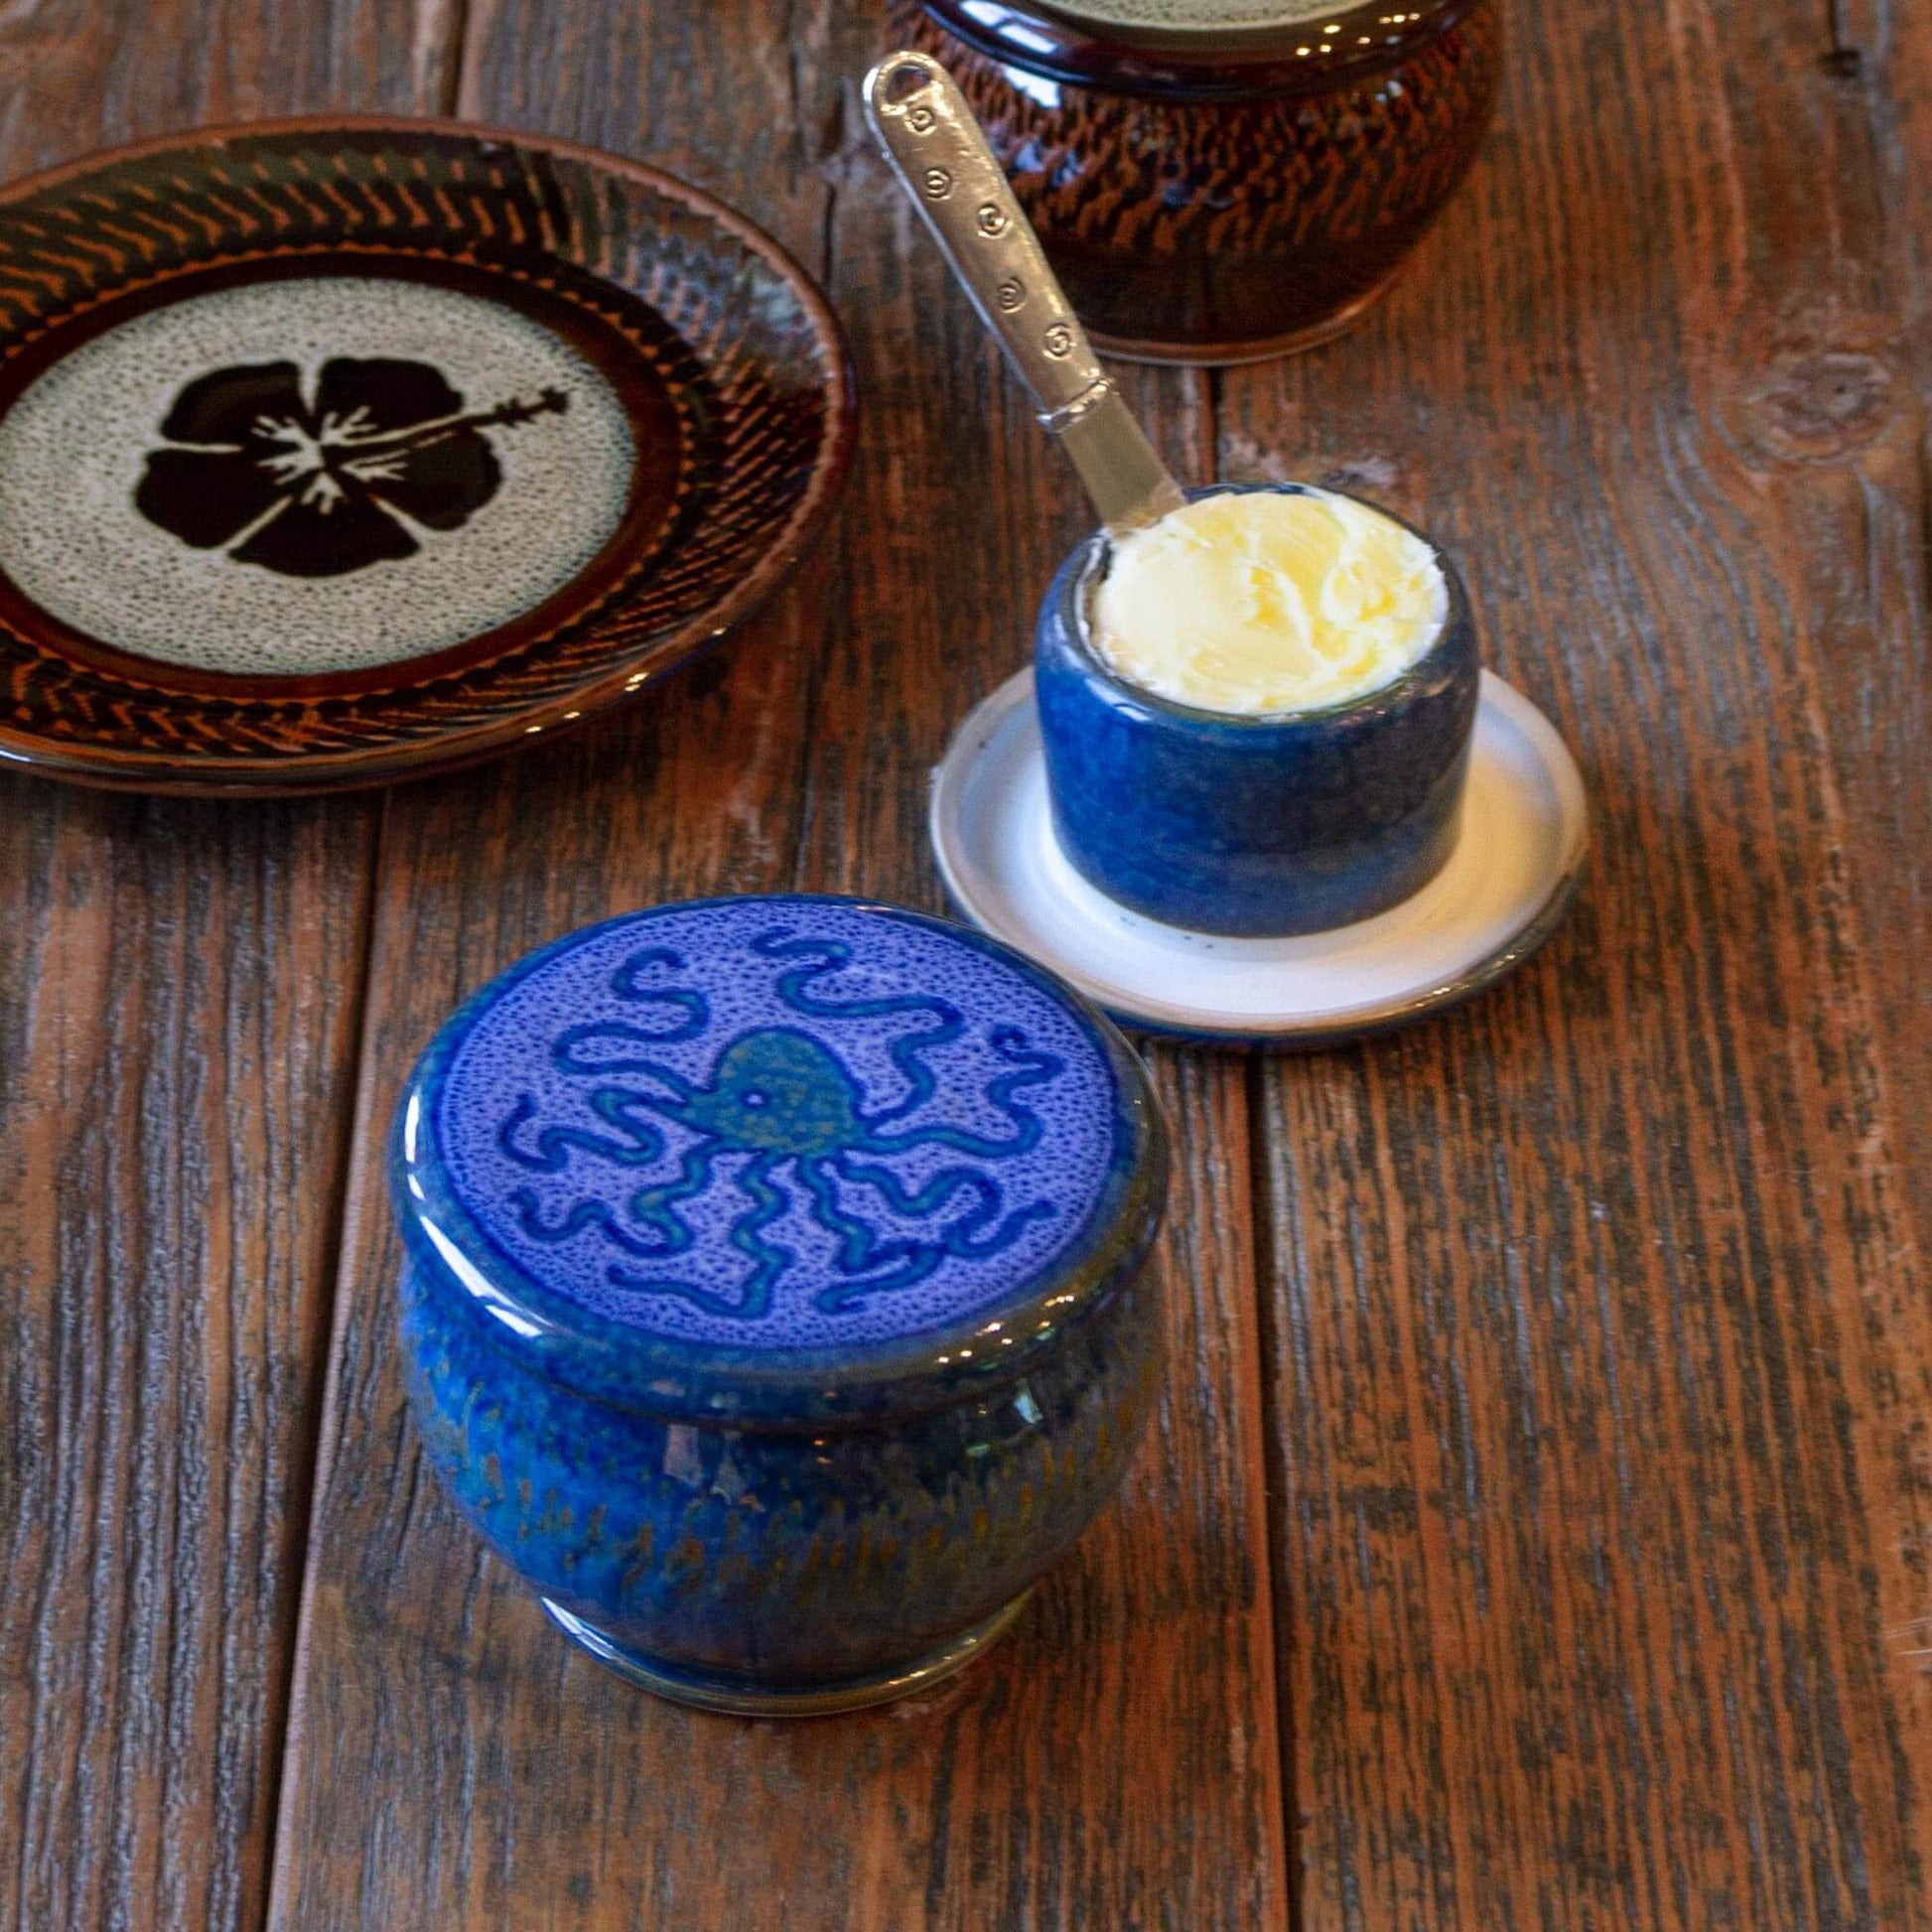 Handmade Pottery French Butter Keeper in Blue Octopus pattern made by Georgetown Pottery in Maine